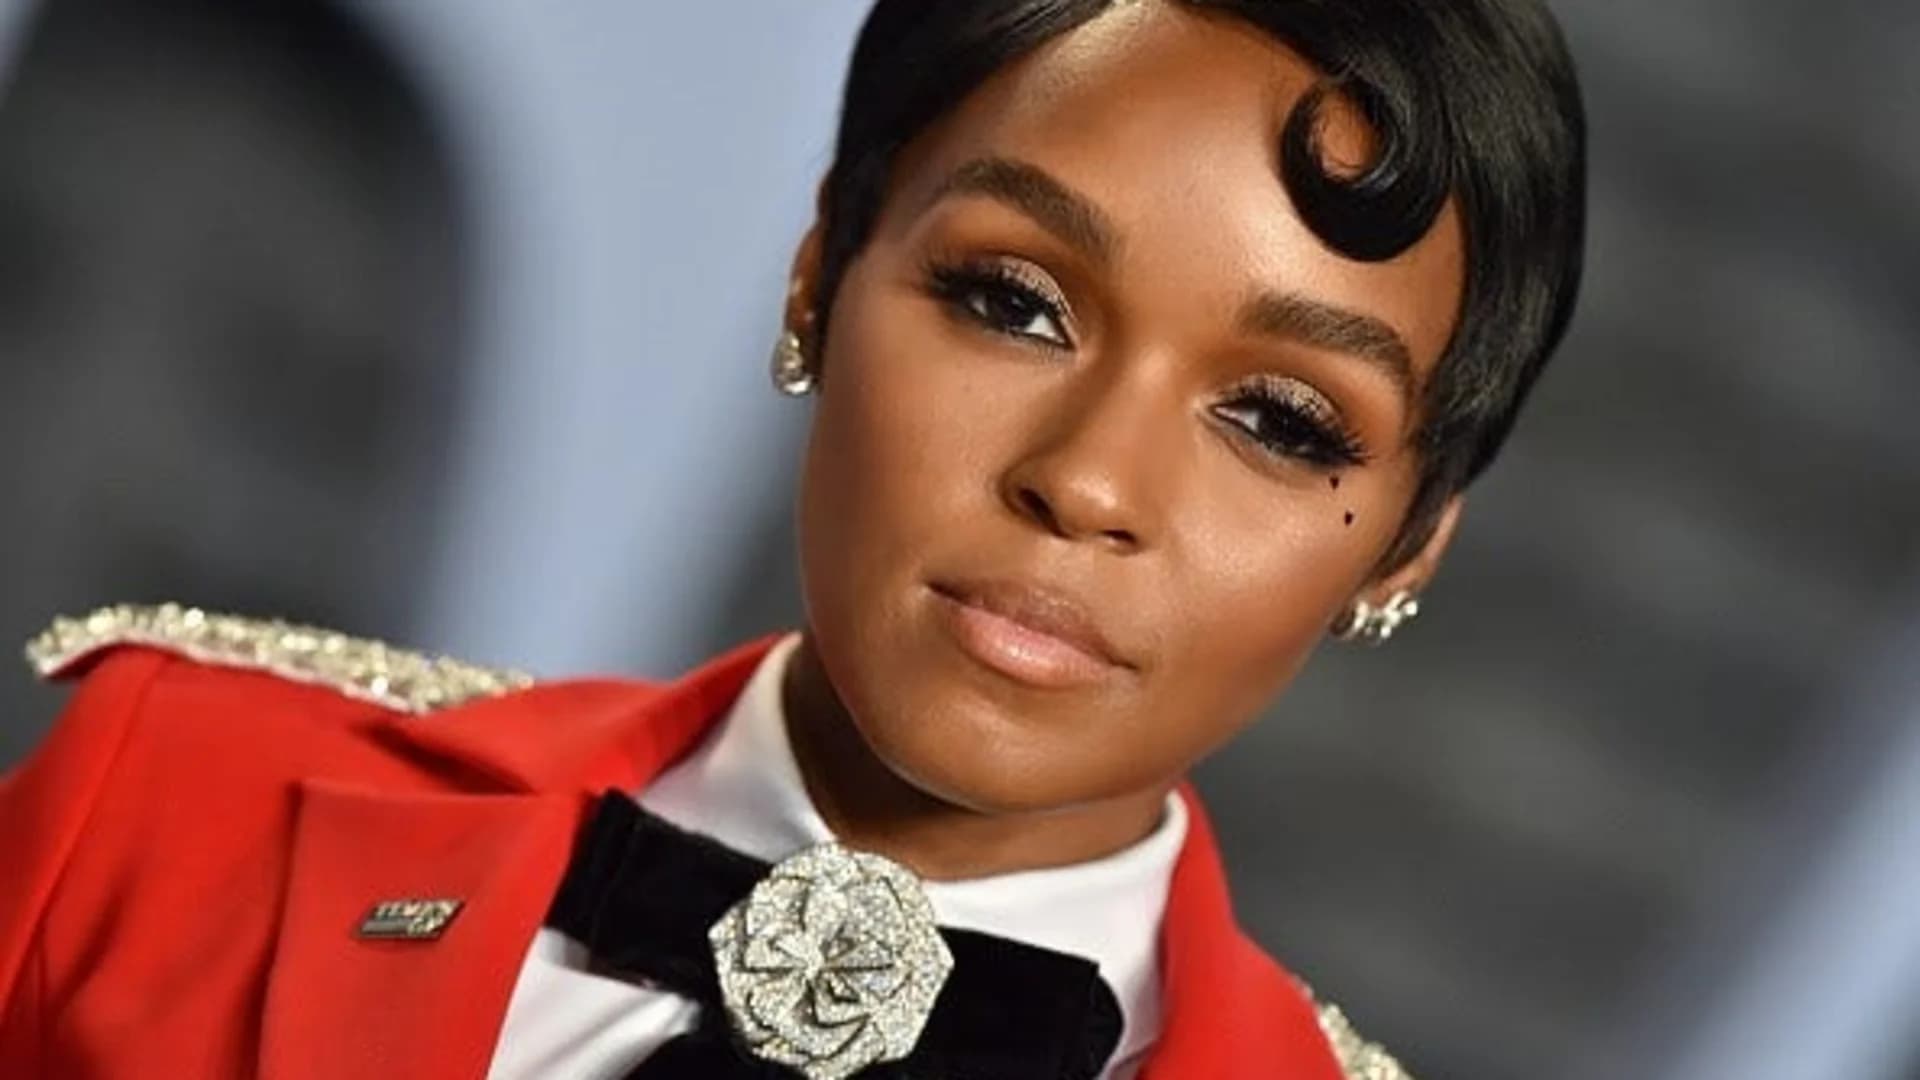 #N12BK: Janelle Monáe comes out as pansexual